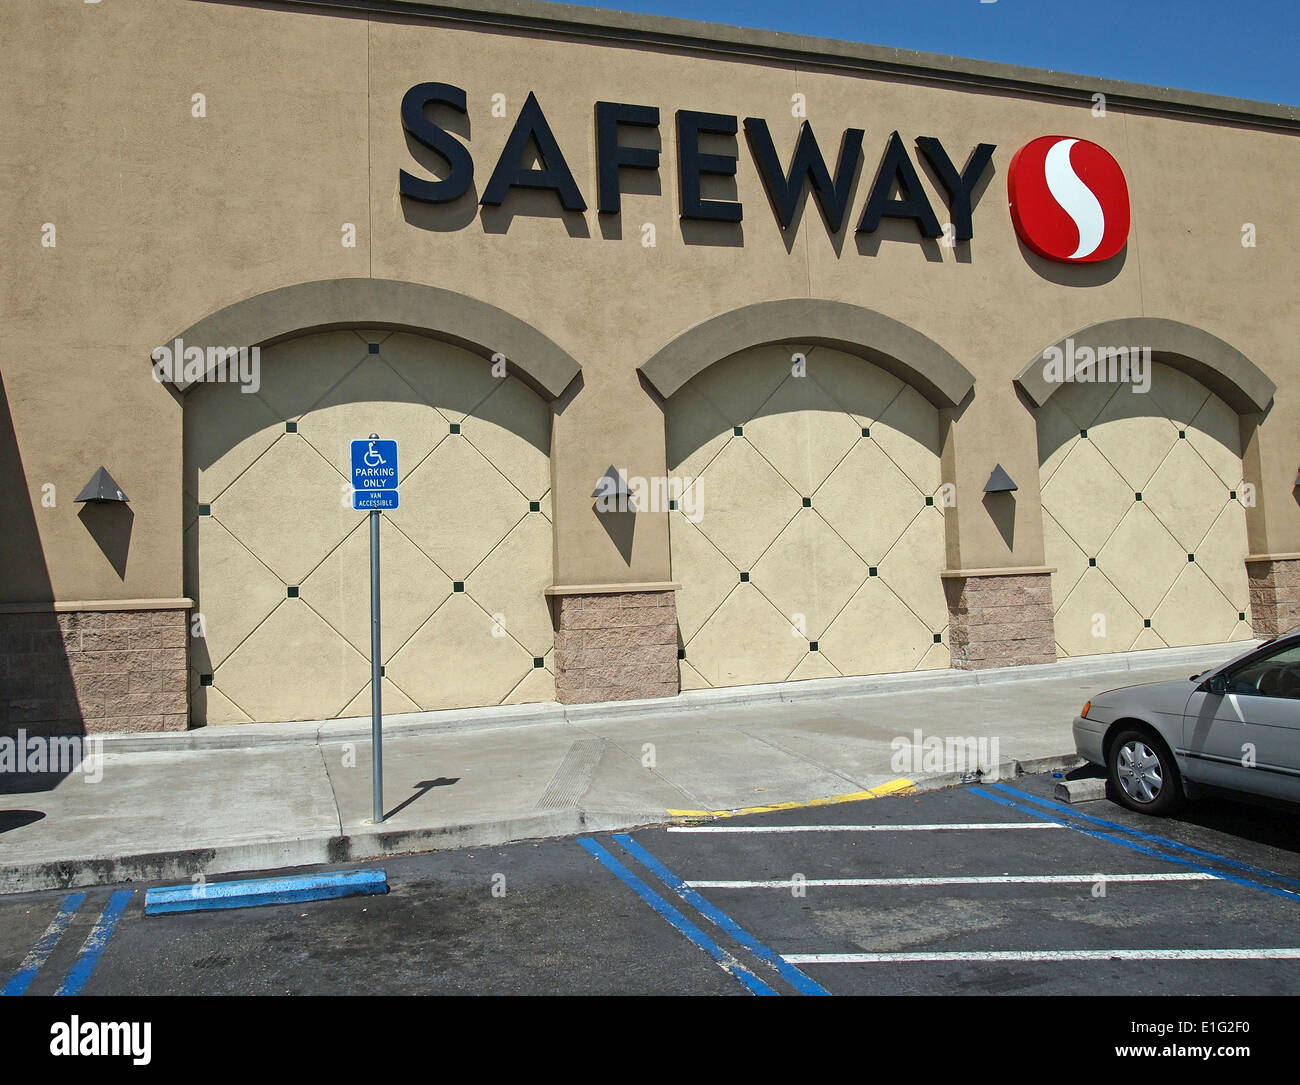 Handicapped symbol parking space at Safeway store Stock Photo